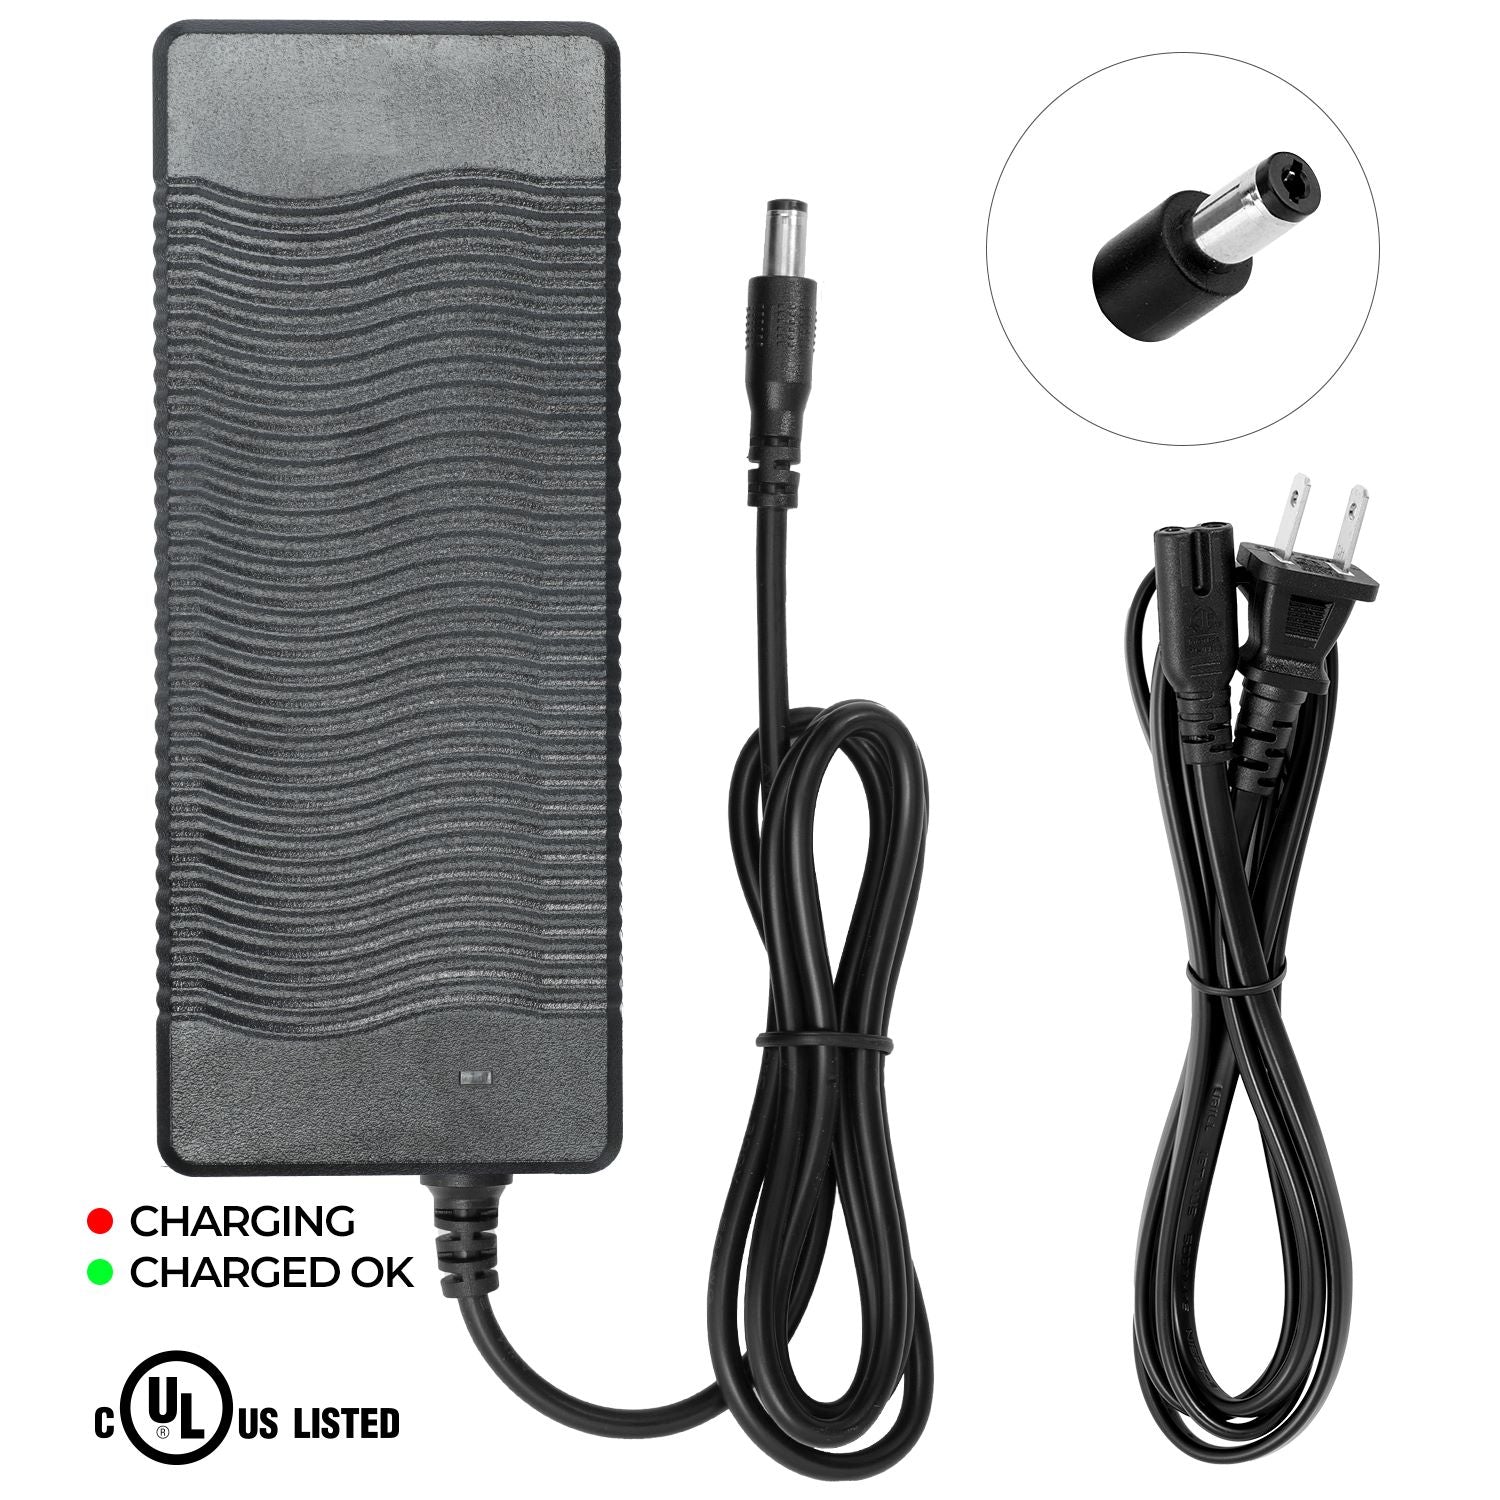 UL Listed Charger for Magnum Ui6 Series eBikes (Ui6 and Ui6+ are Different, Please Choose the Correct Variant)